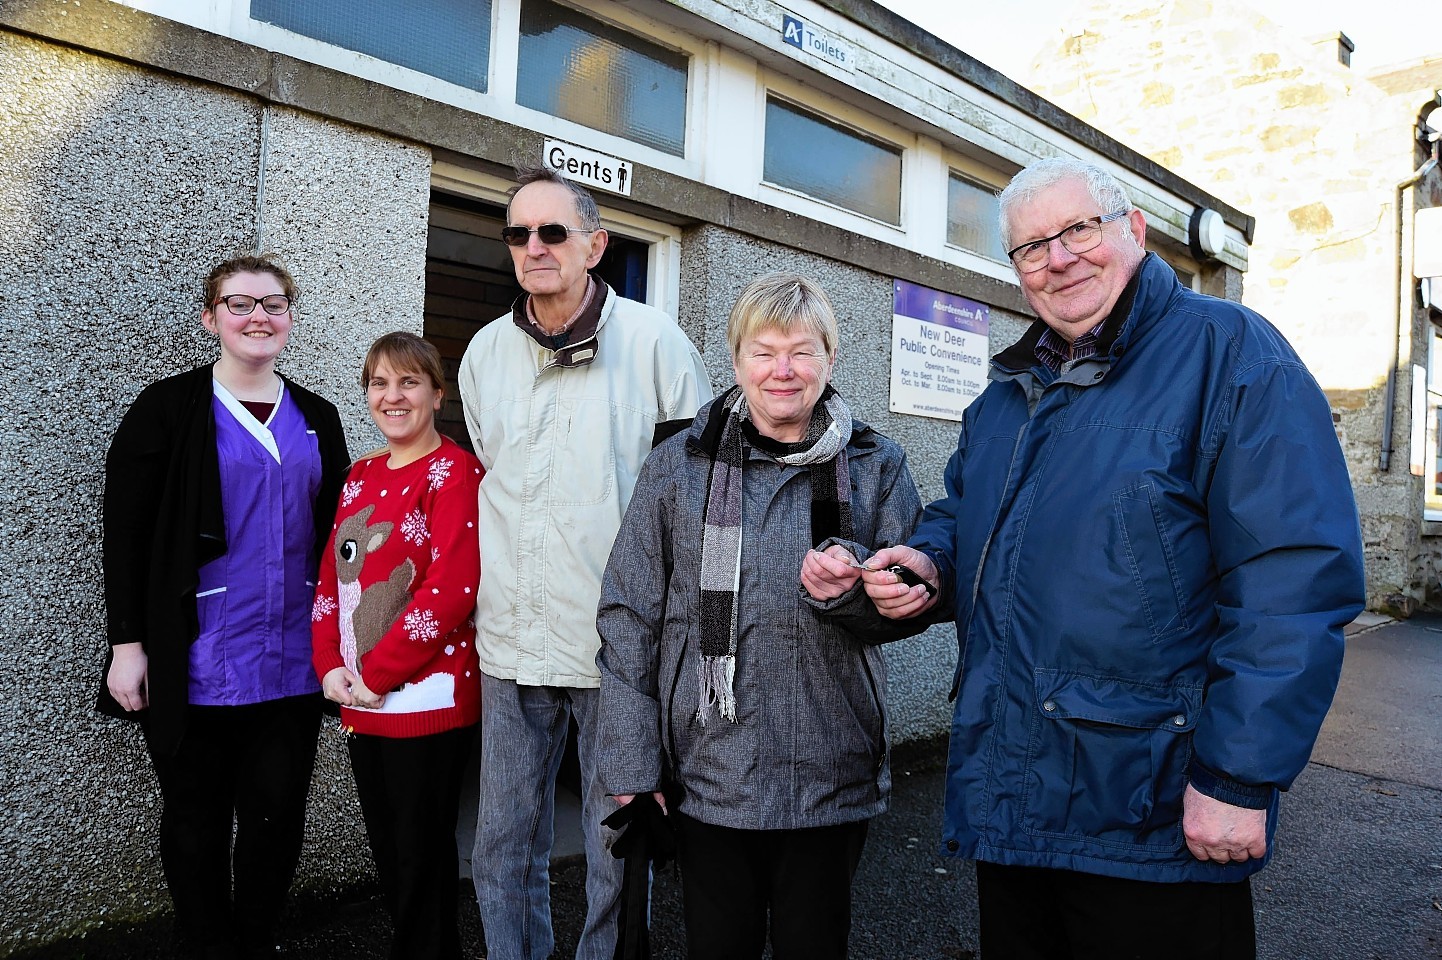 Councillor Norman Smith hands over the keys to residents